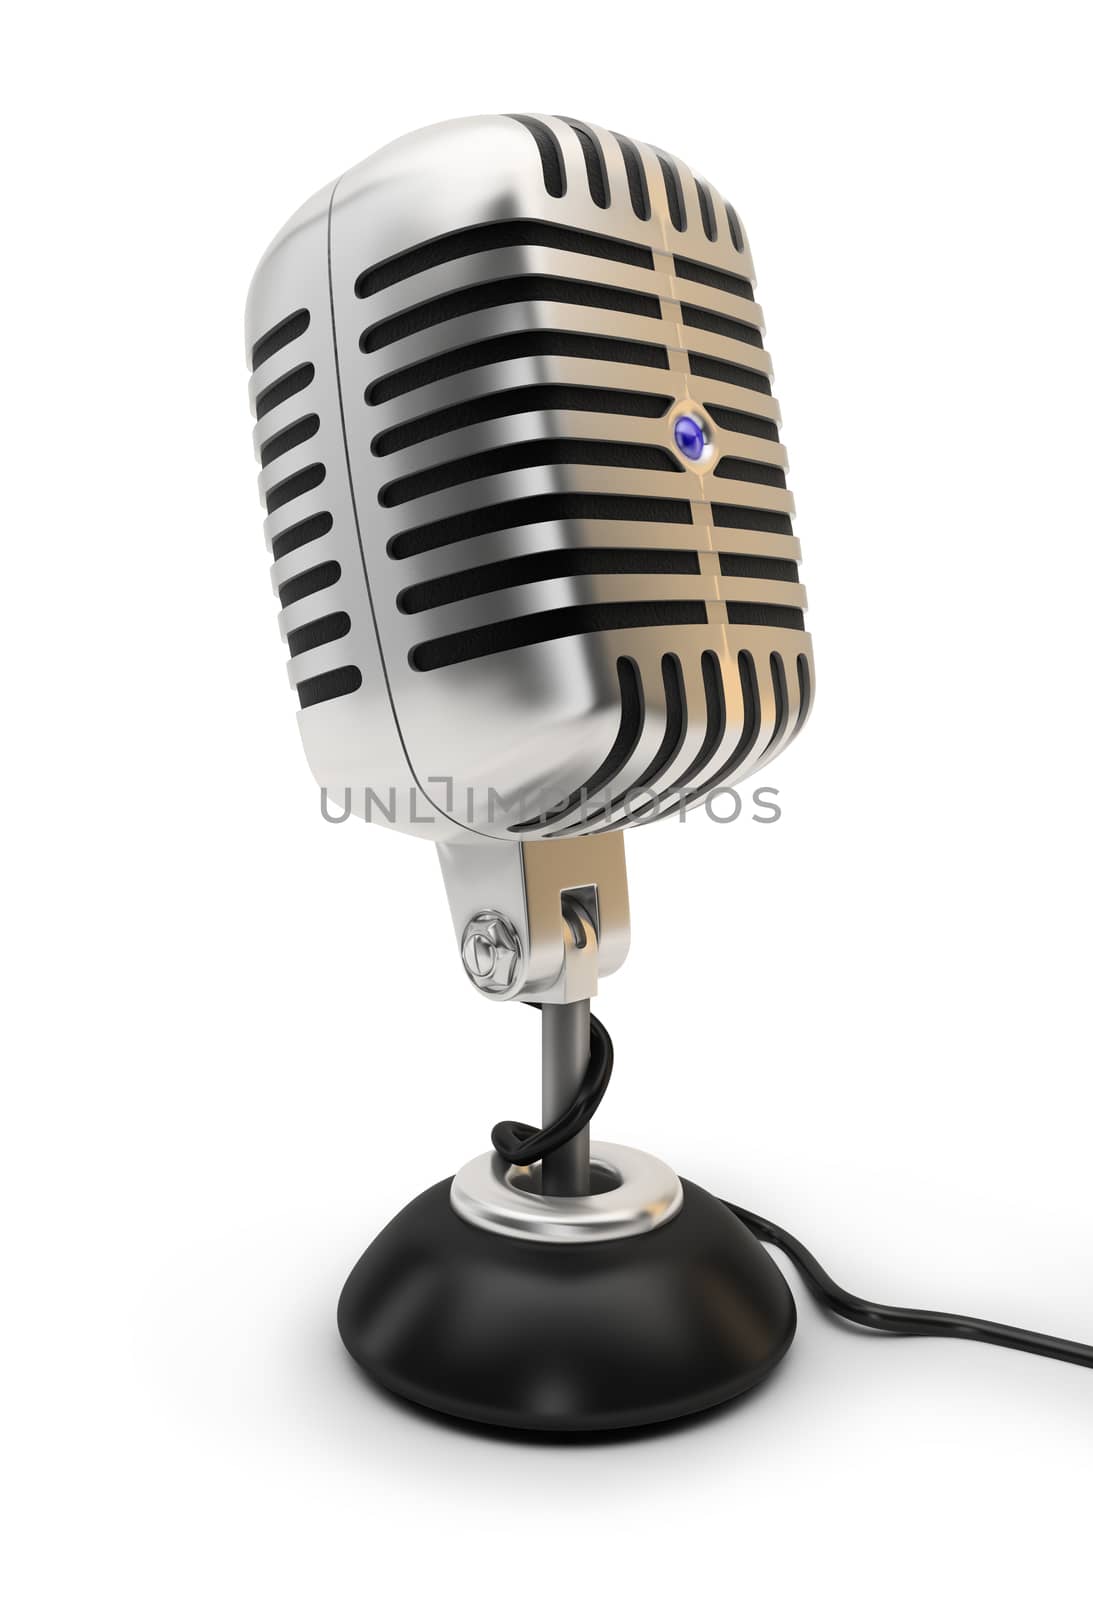 Retro a microphone. 3d image. Isolated white background.